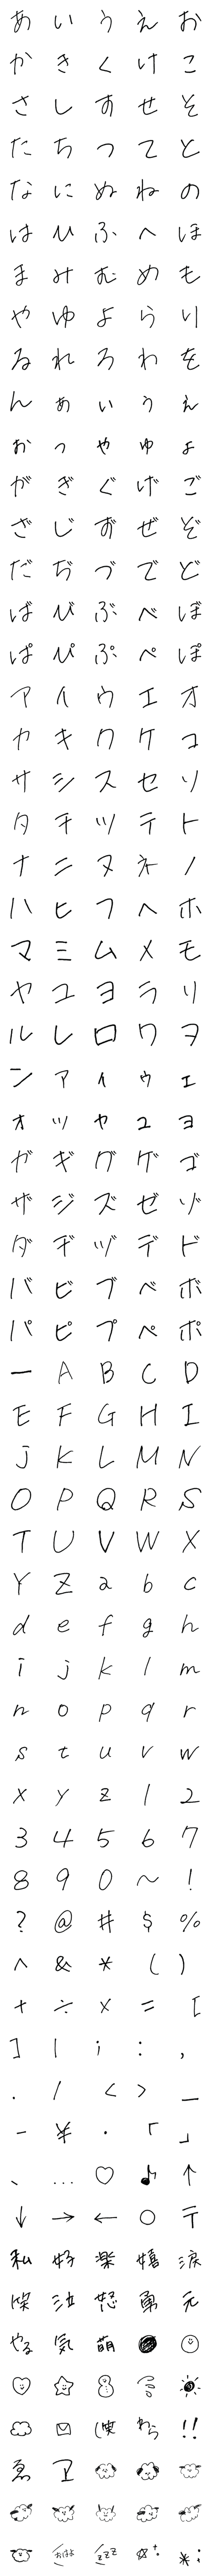 [LINE絵文字]さもフォントの画像一覧